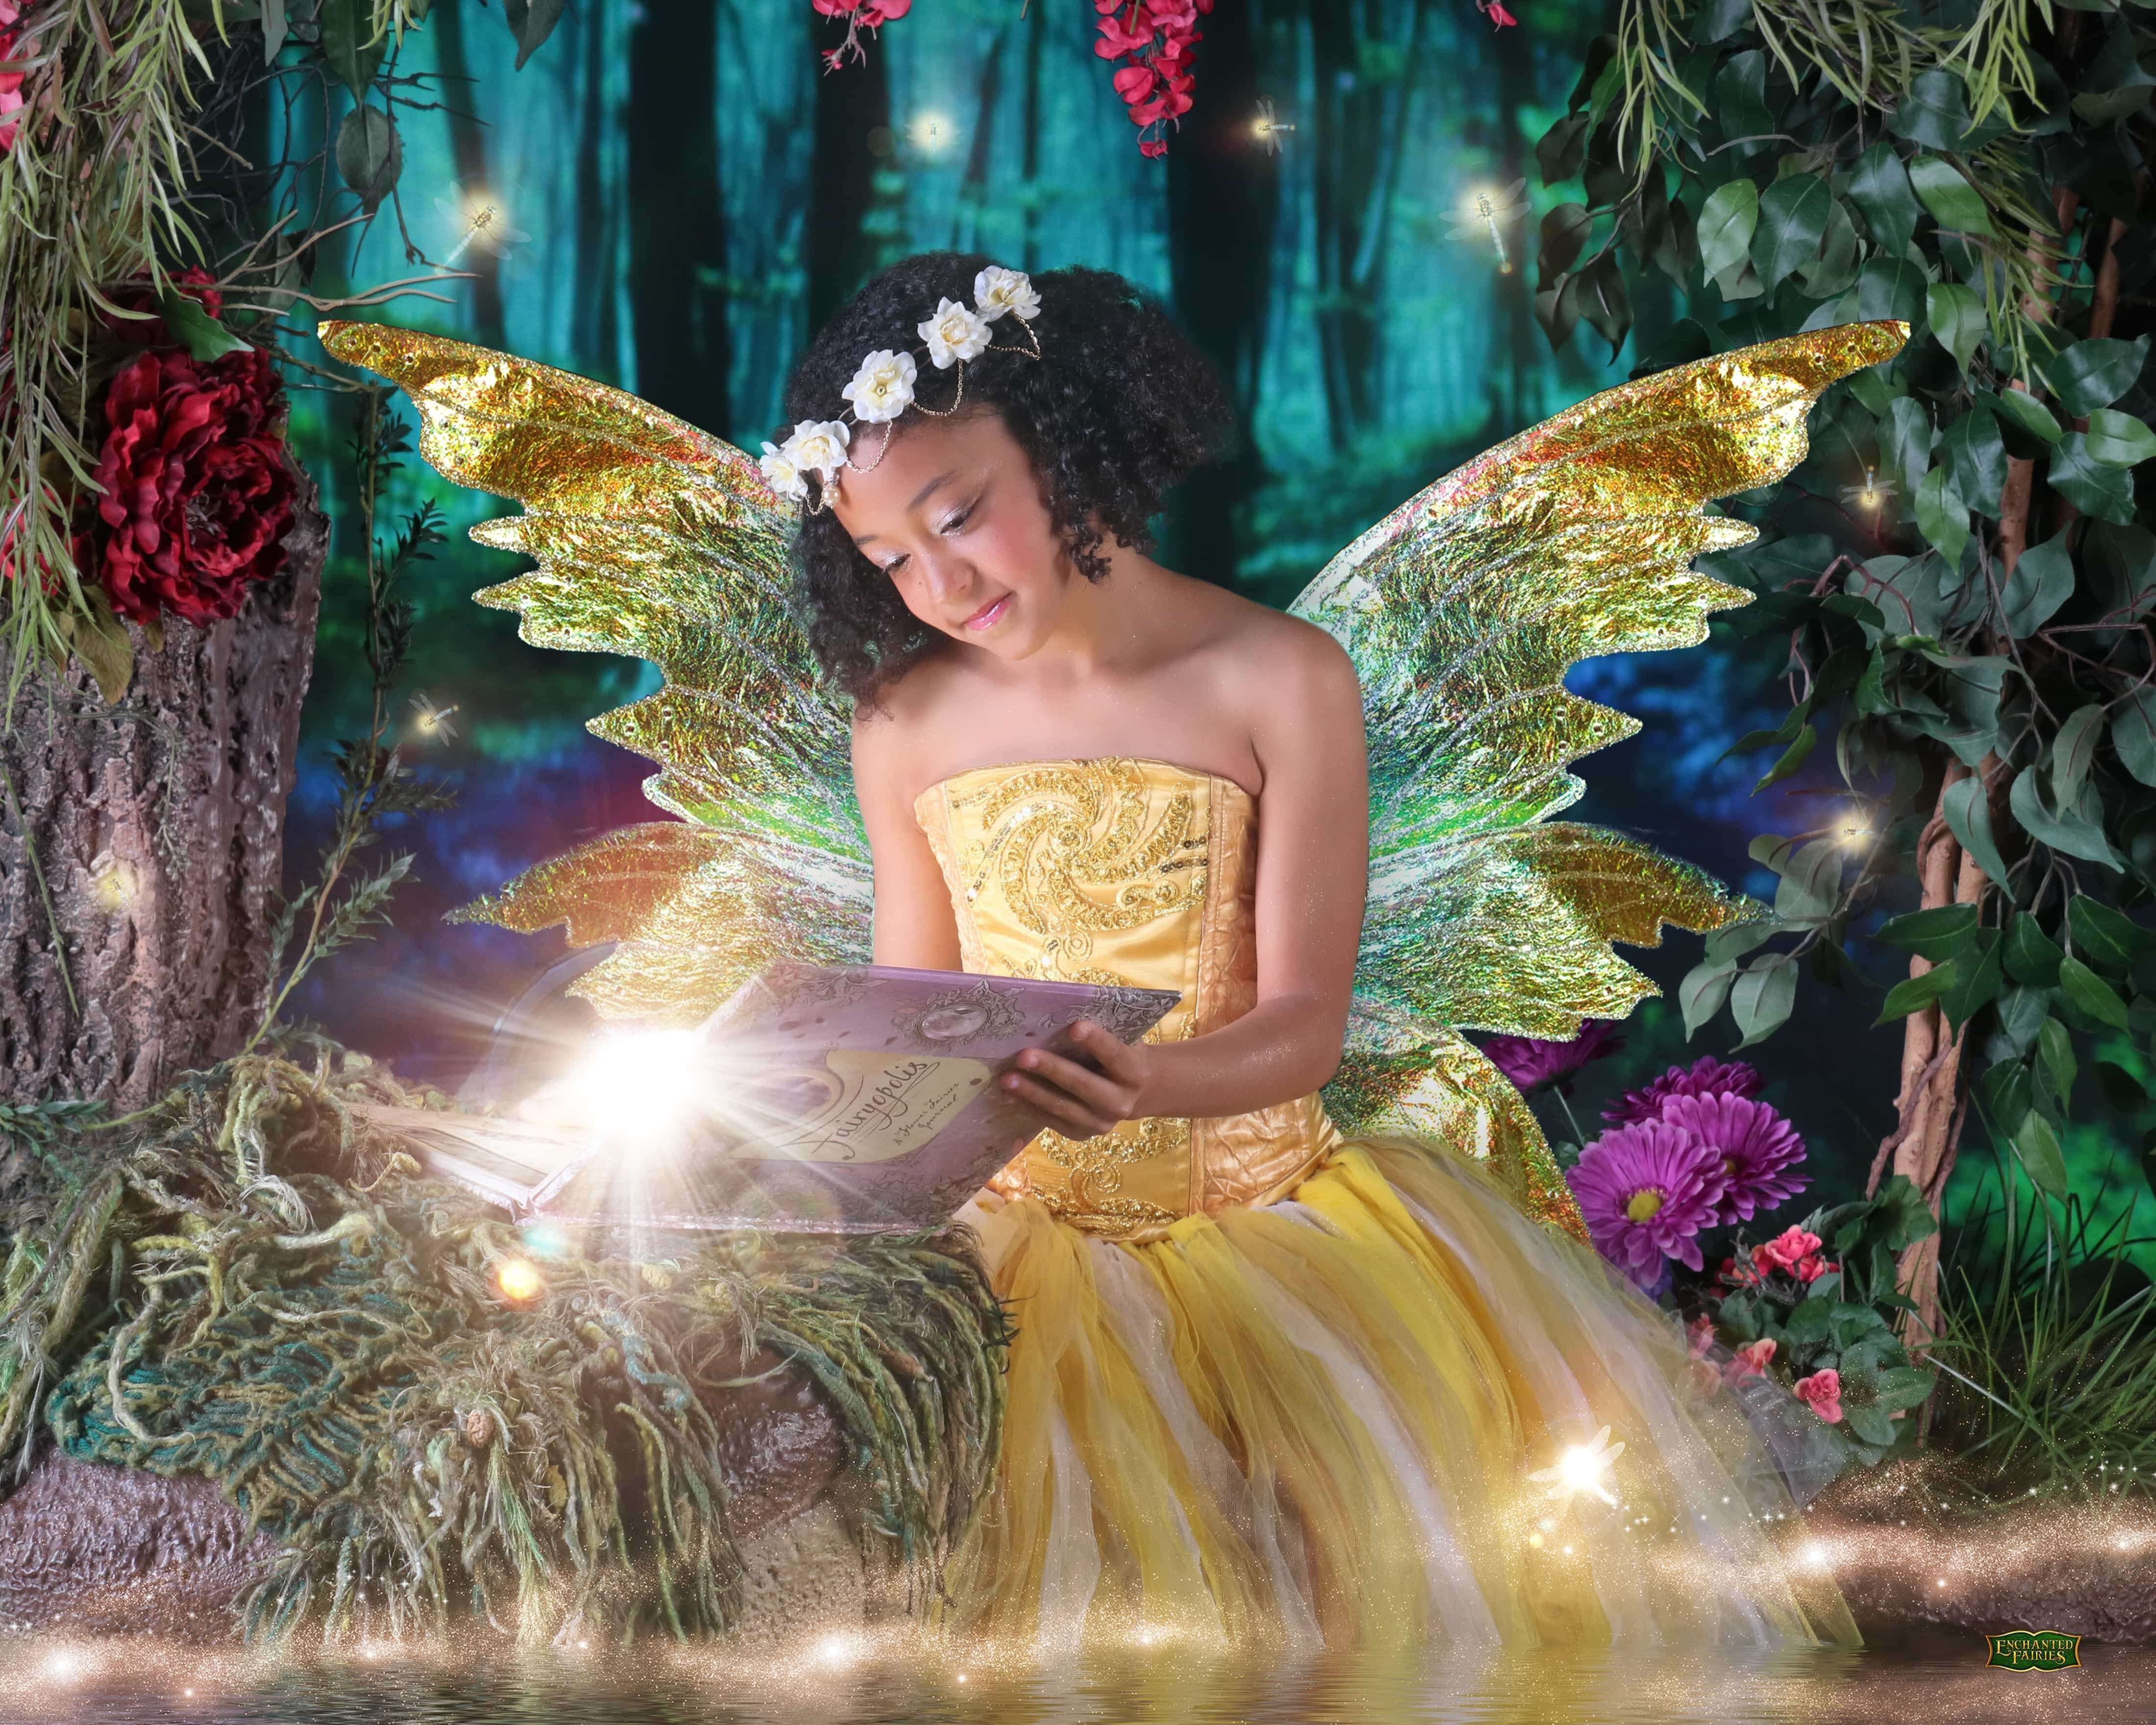 ENCHANTED FAIRIES SESSIONS ARE NOW BOOKING Enchanted Fairies Fairy Photoshoot